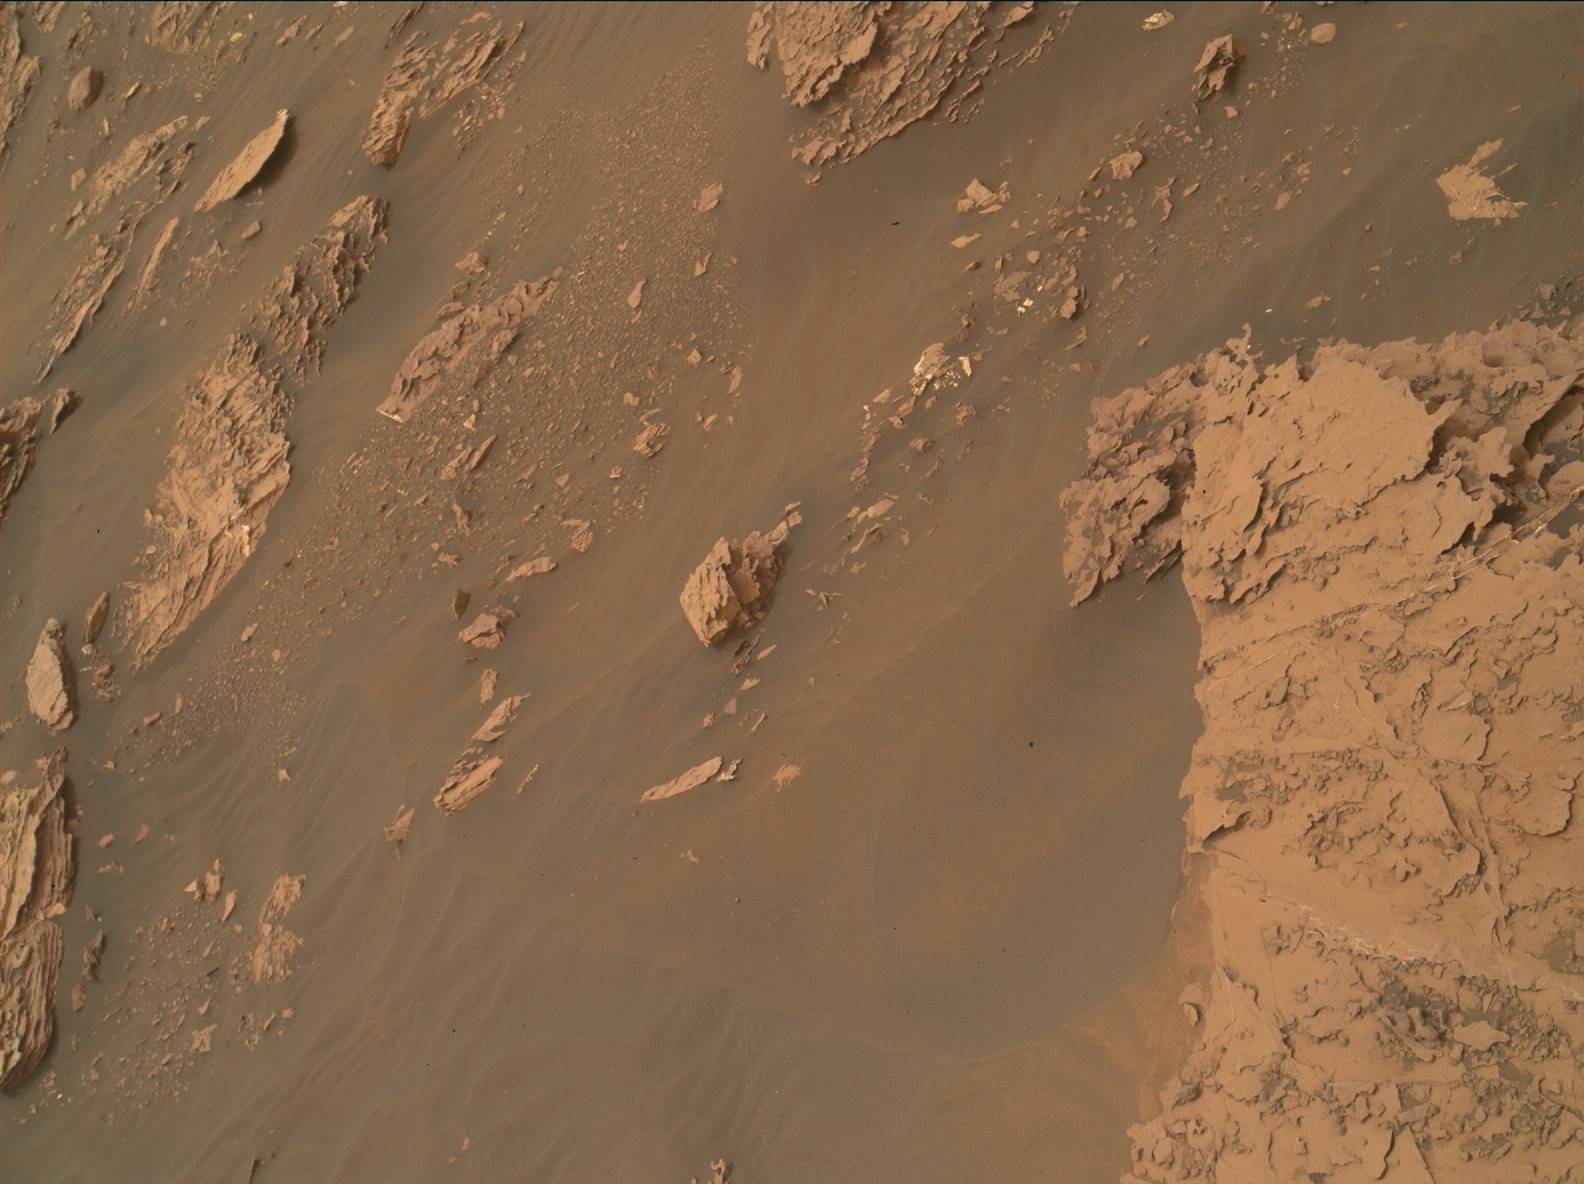 Nasa's Mars rover Curiosity acquired this image using its Mars Hand Lens Imager (MAHLI) on Sol 2082